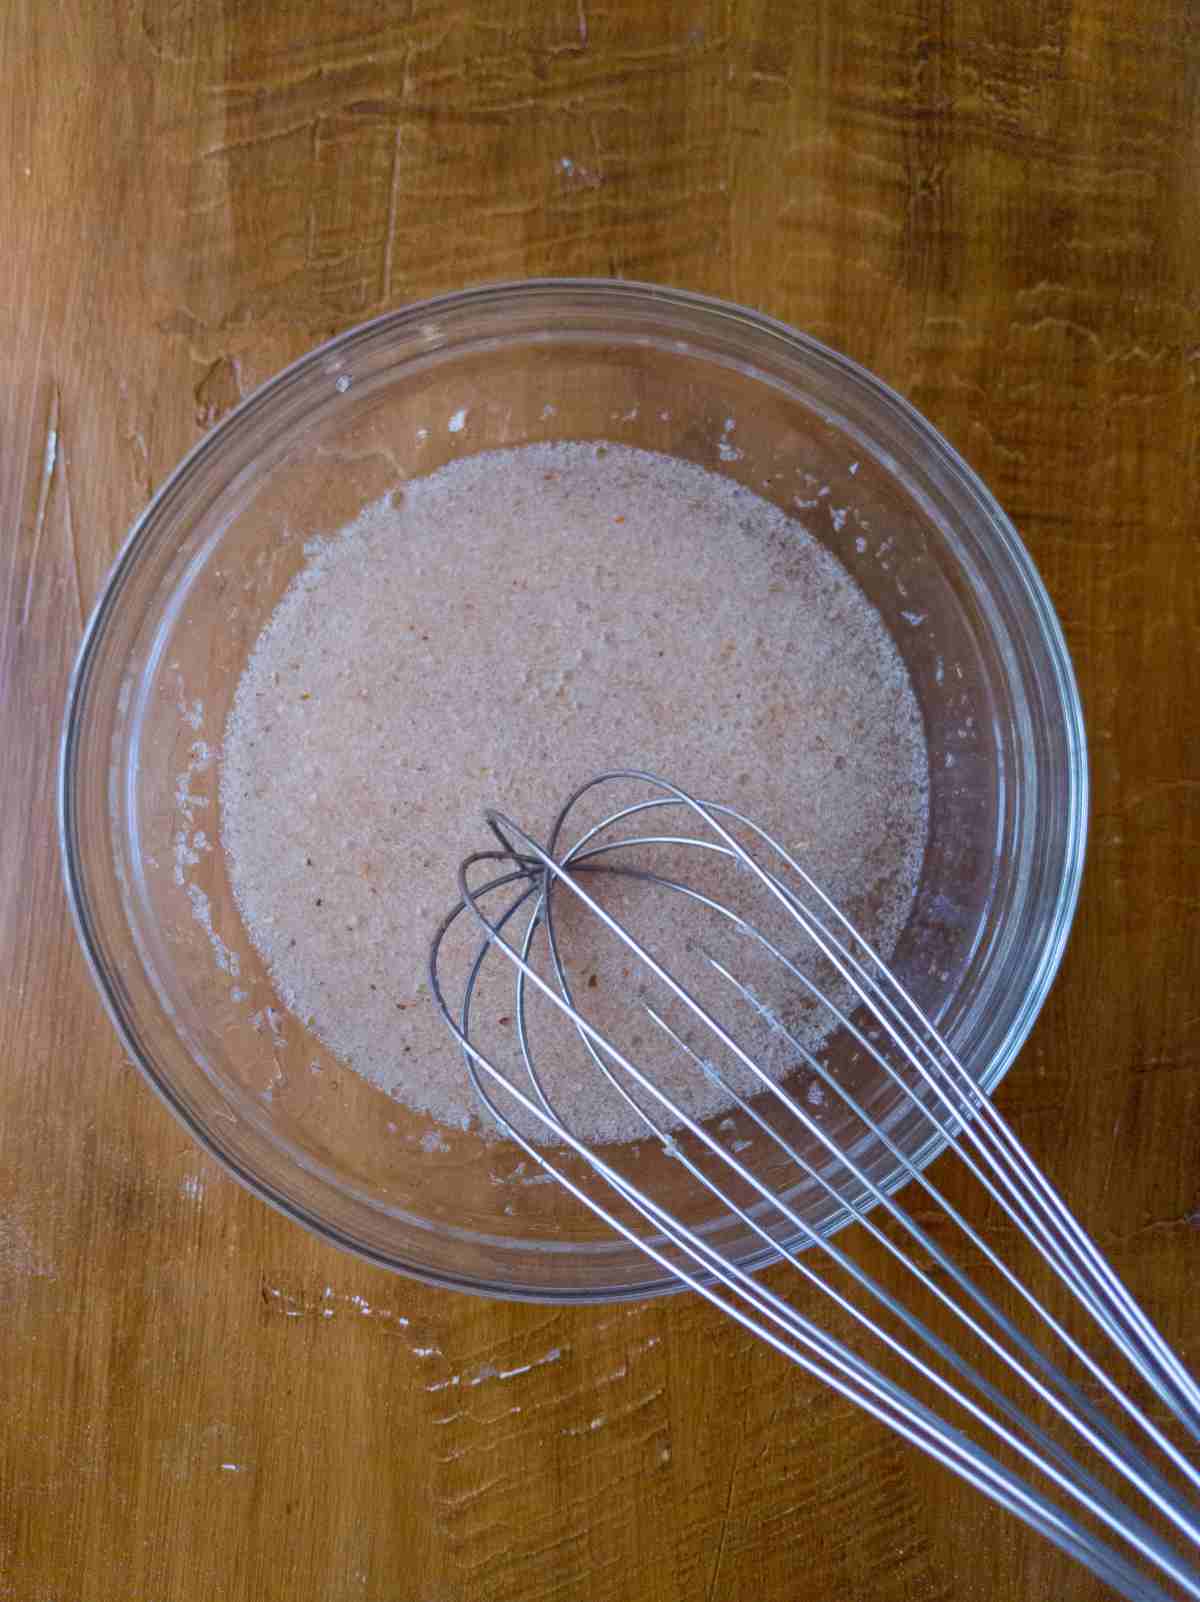 Psyllium husk mixed with water in a glass bowl with a whisk in it.